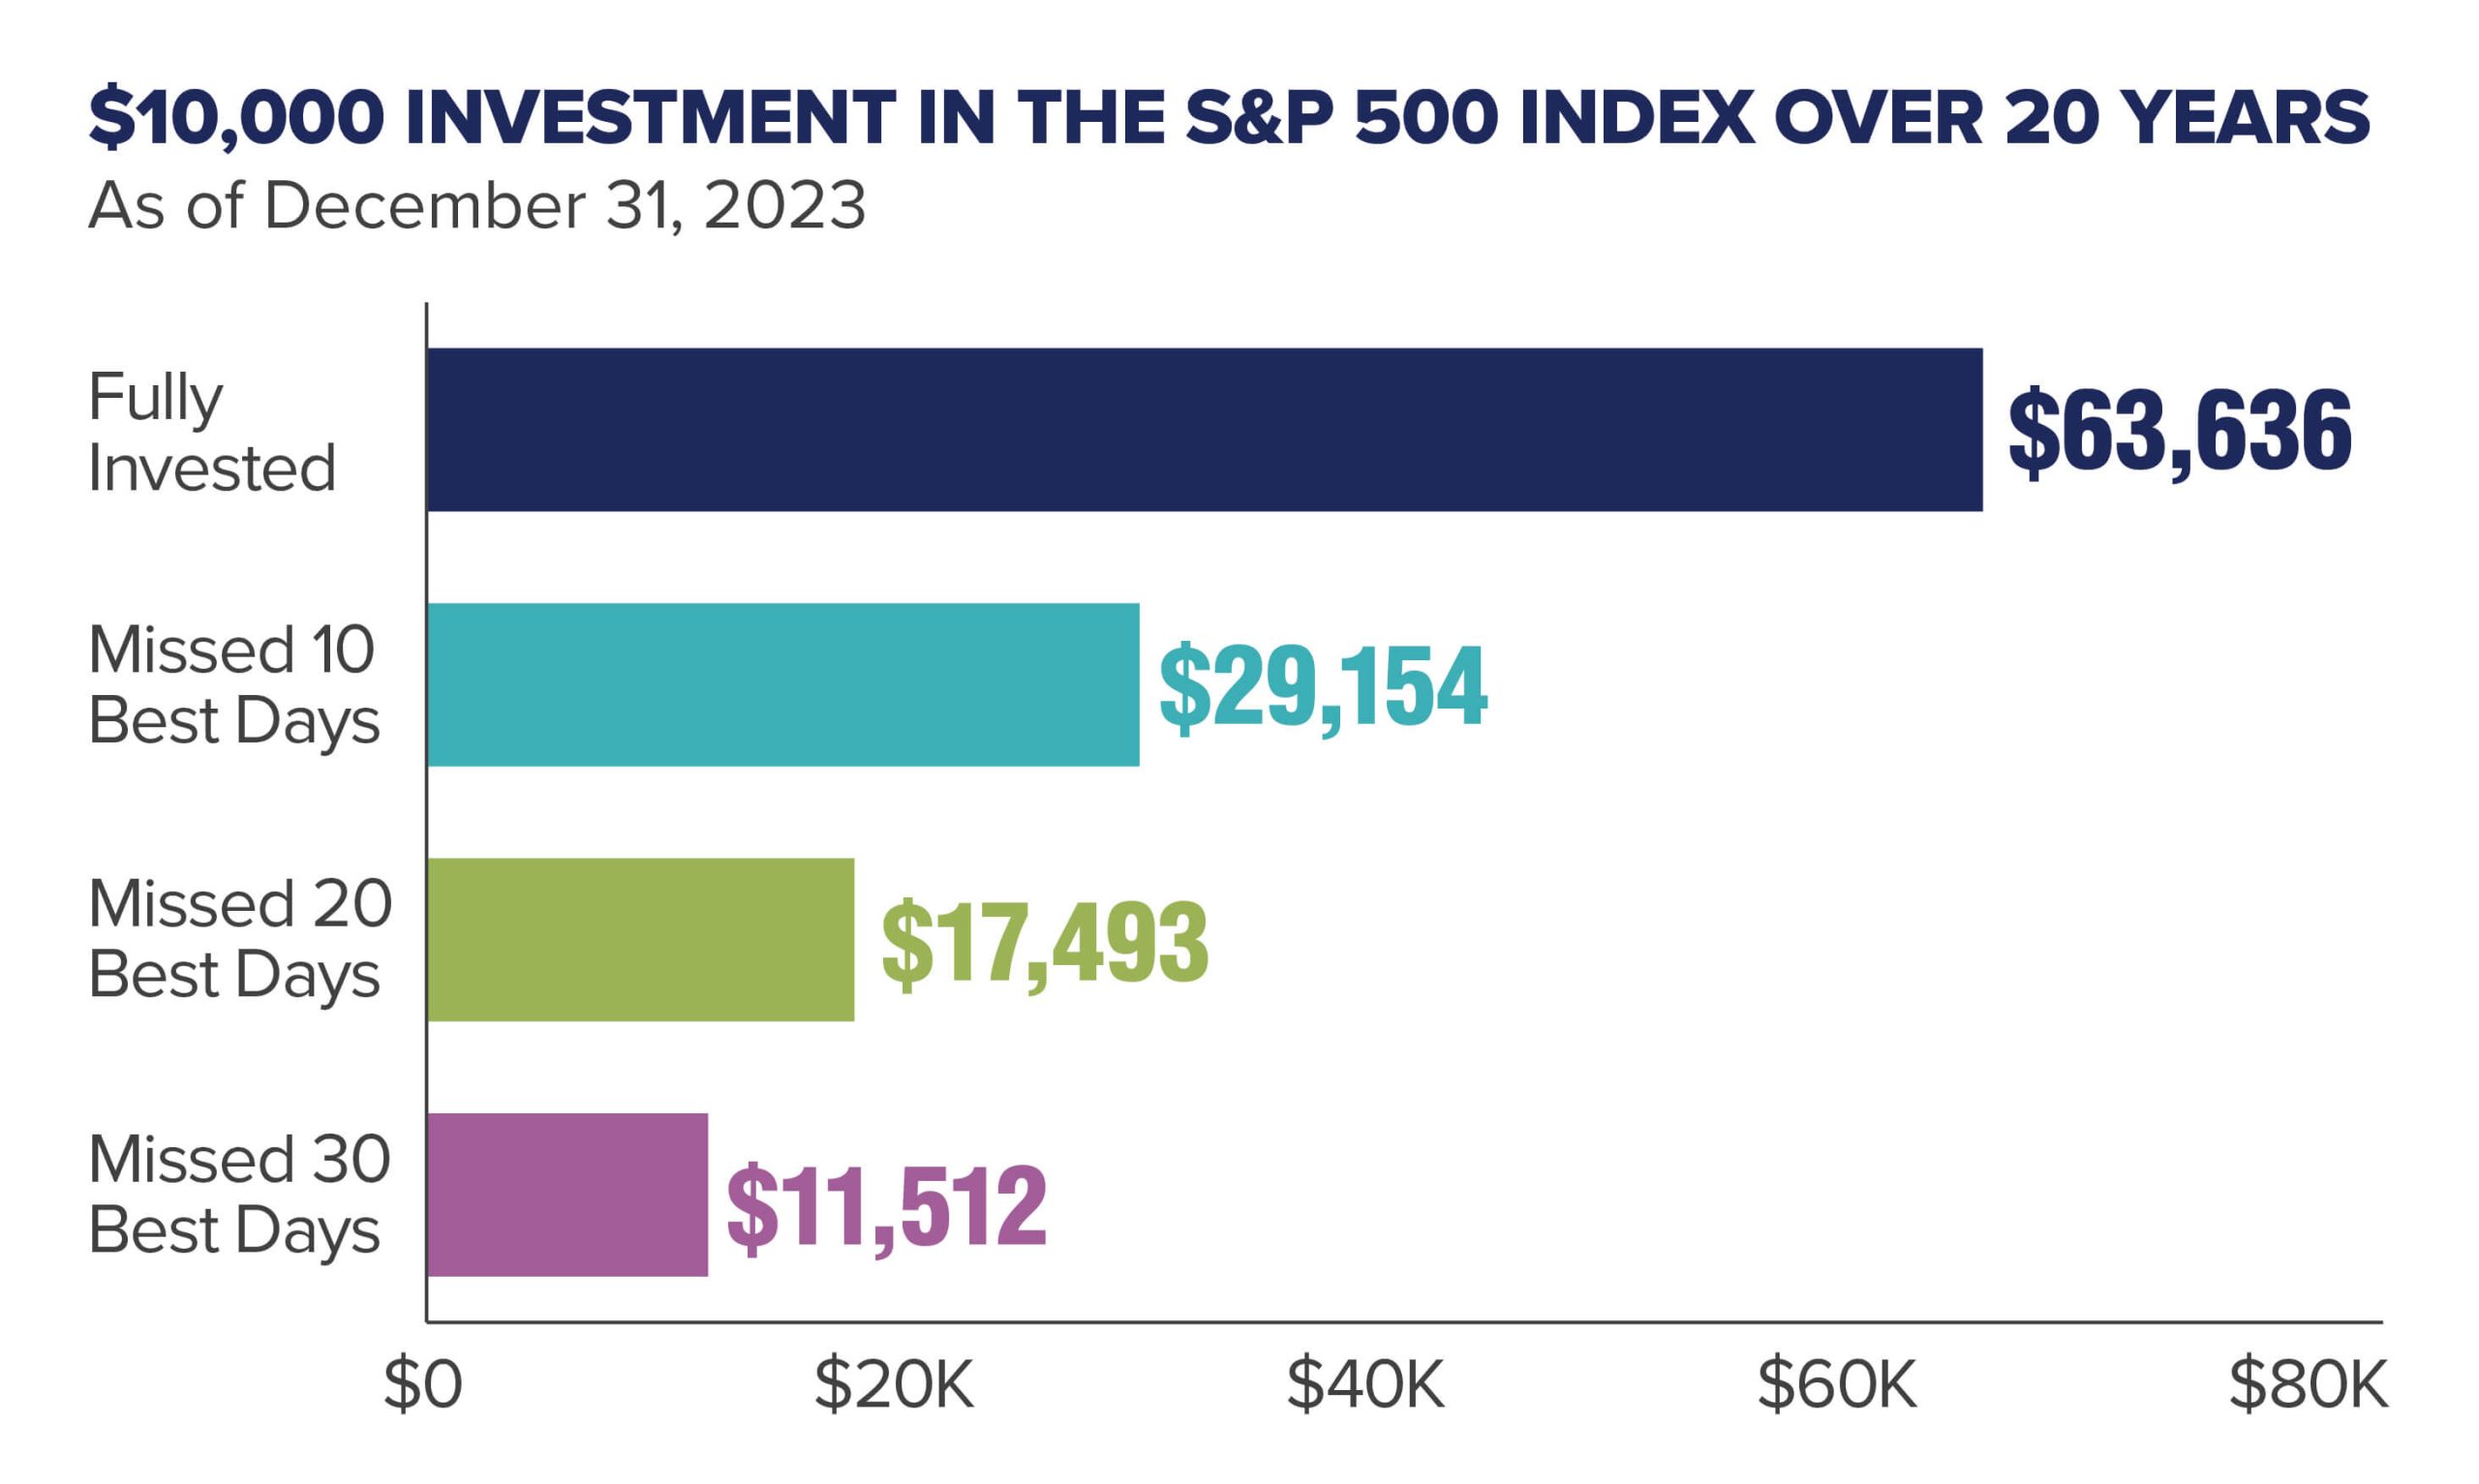 $10,000 Investment in the S&P 500 Index Over 20 Years